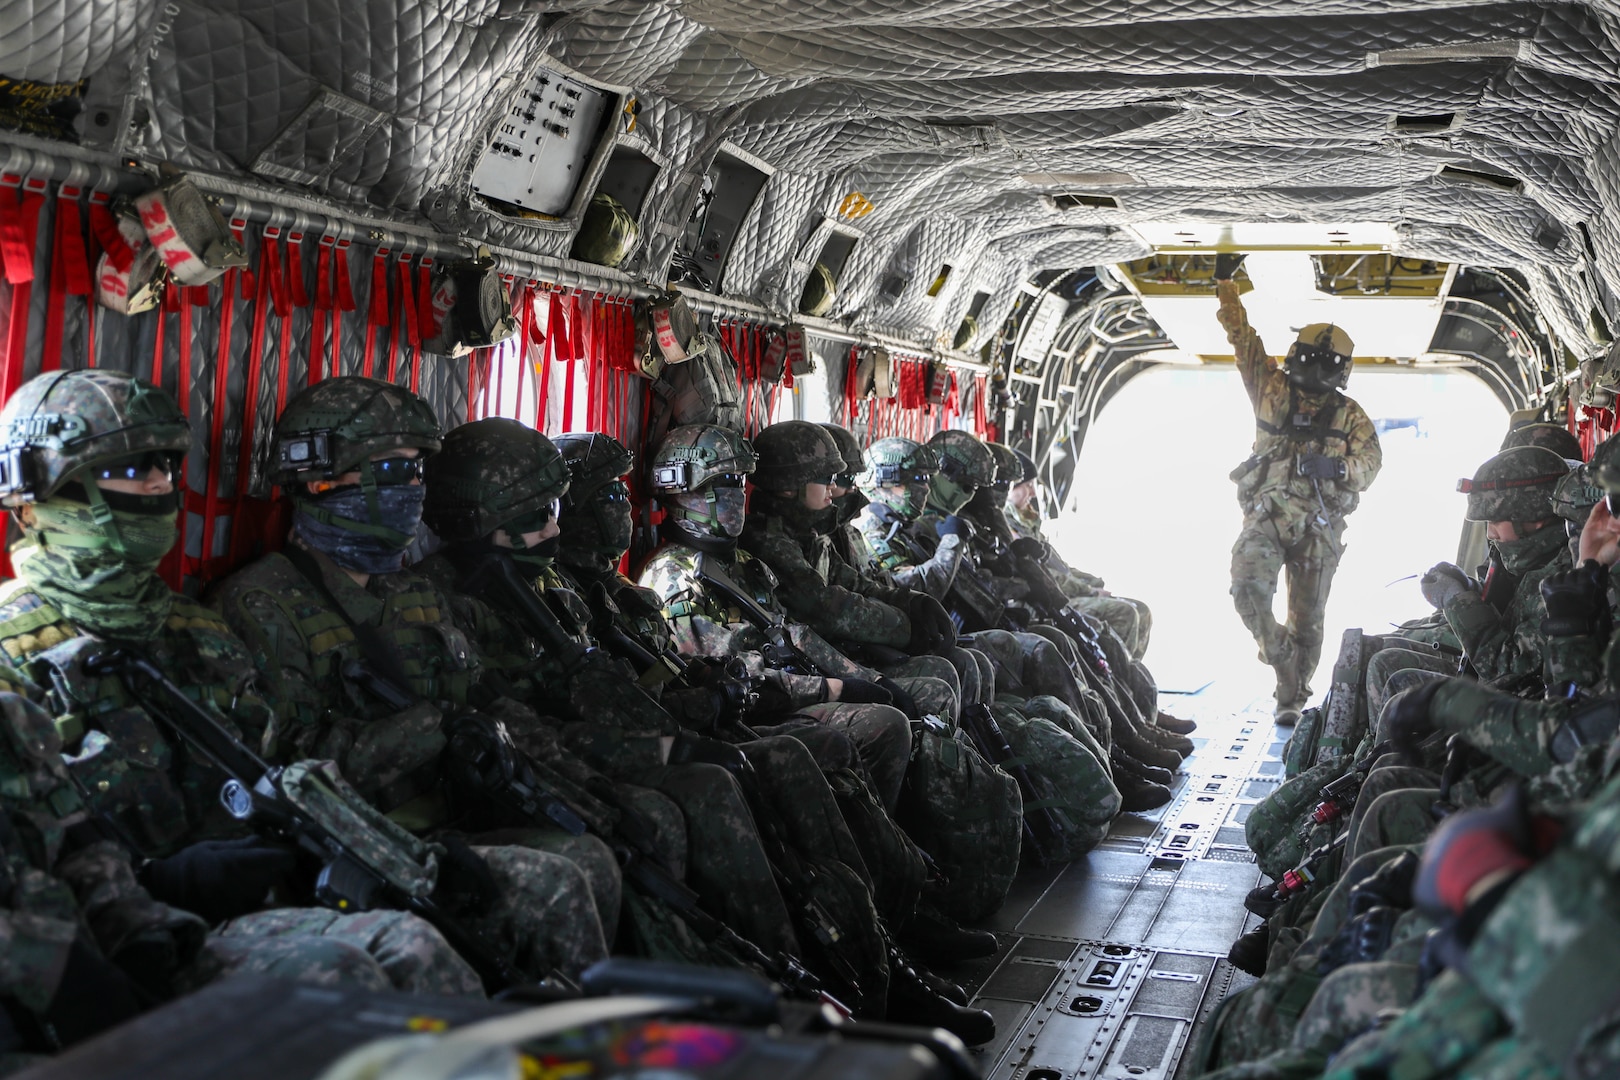 U.S. Army Ch-47F Chinook helicopters, 2nd Division/ROK-U.S. Combined Division, deliver troops to a training area while conducting combined air and ground assault training exercises during Freedom Shield 24, March 13, 2024, at the Korea Combined Training Center in South Korea. An annual event, FS24, a holistic military training program, integrates ground, air, and naval elements, enhancing readiness through realistic combat simulations, interoperability, and live exercises refining troops’ combat skills.